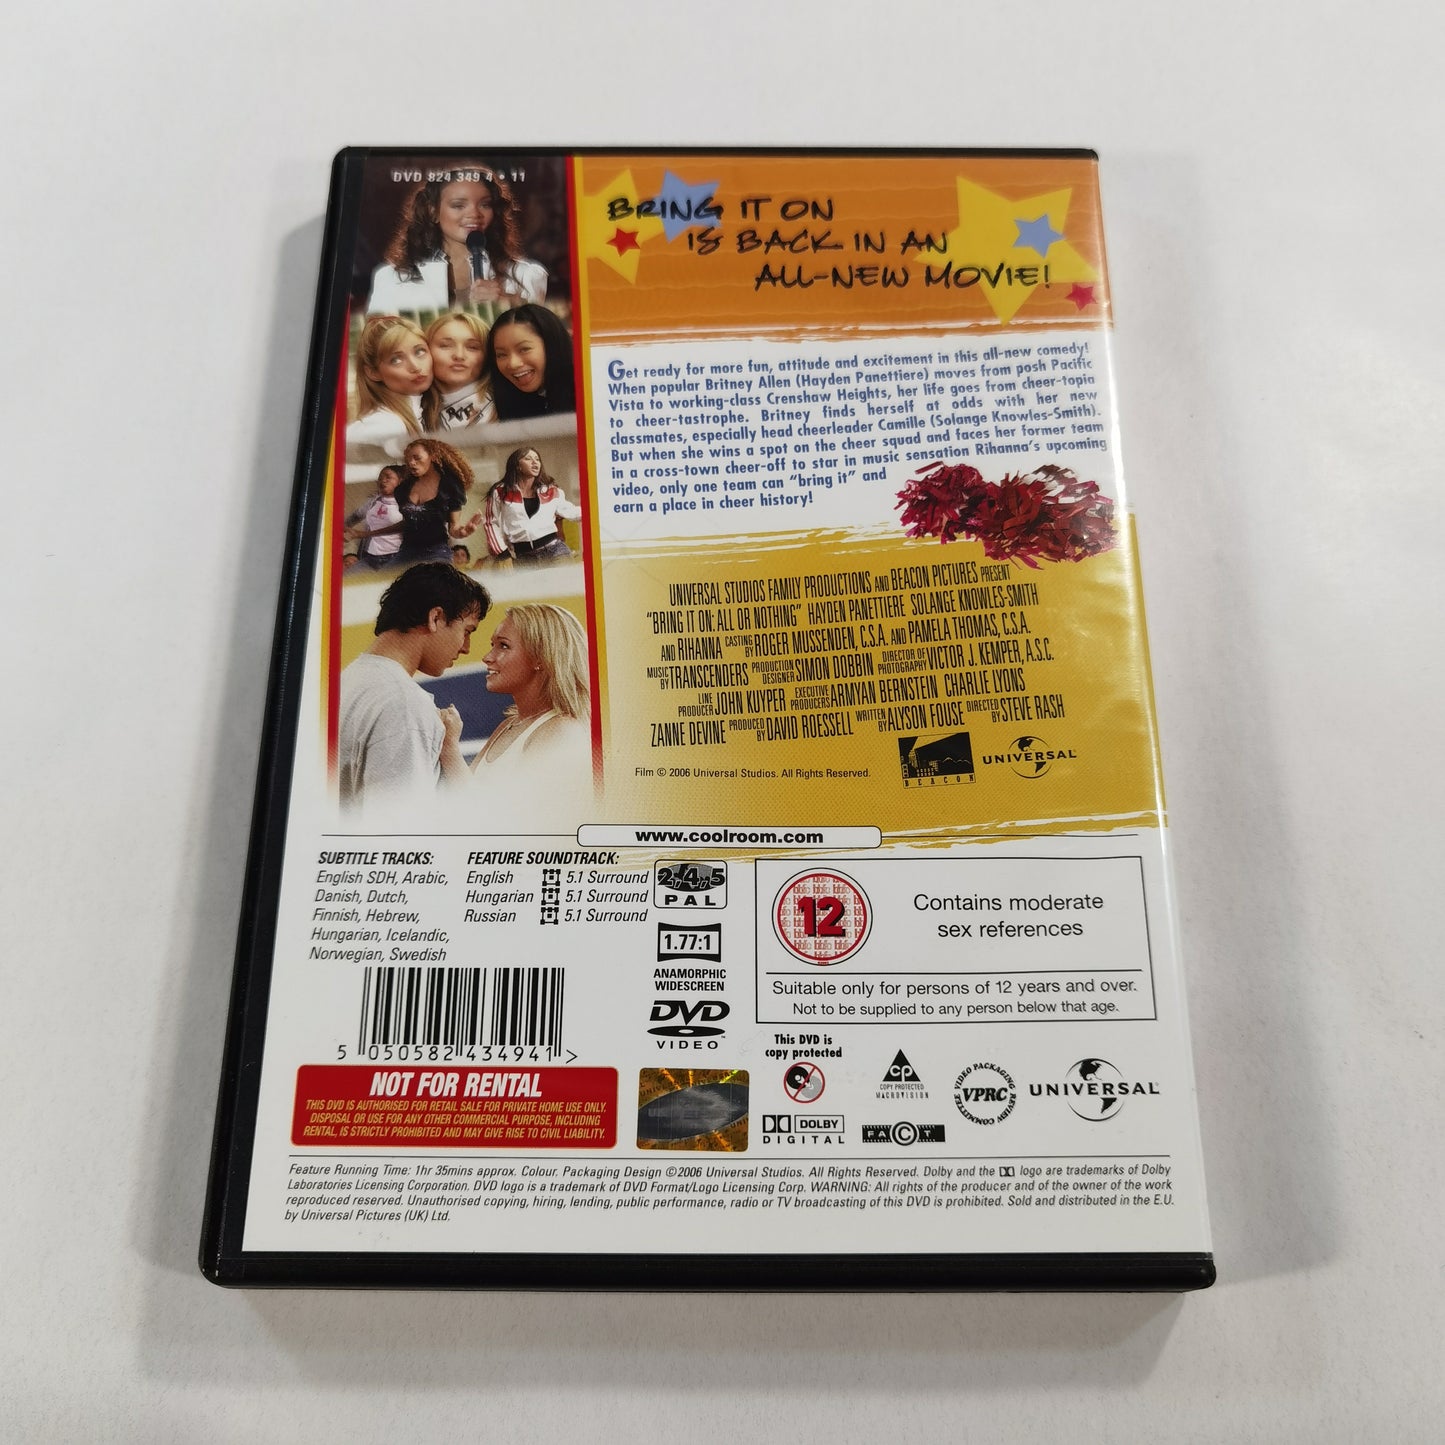 Bring It On: All or Nothing (2006) - DVD UK 2006